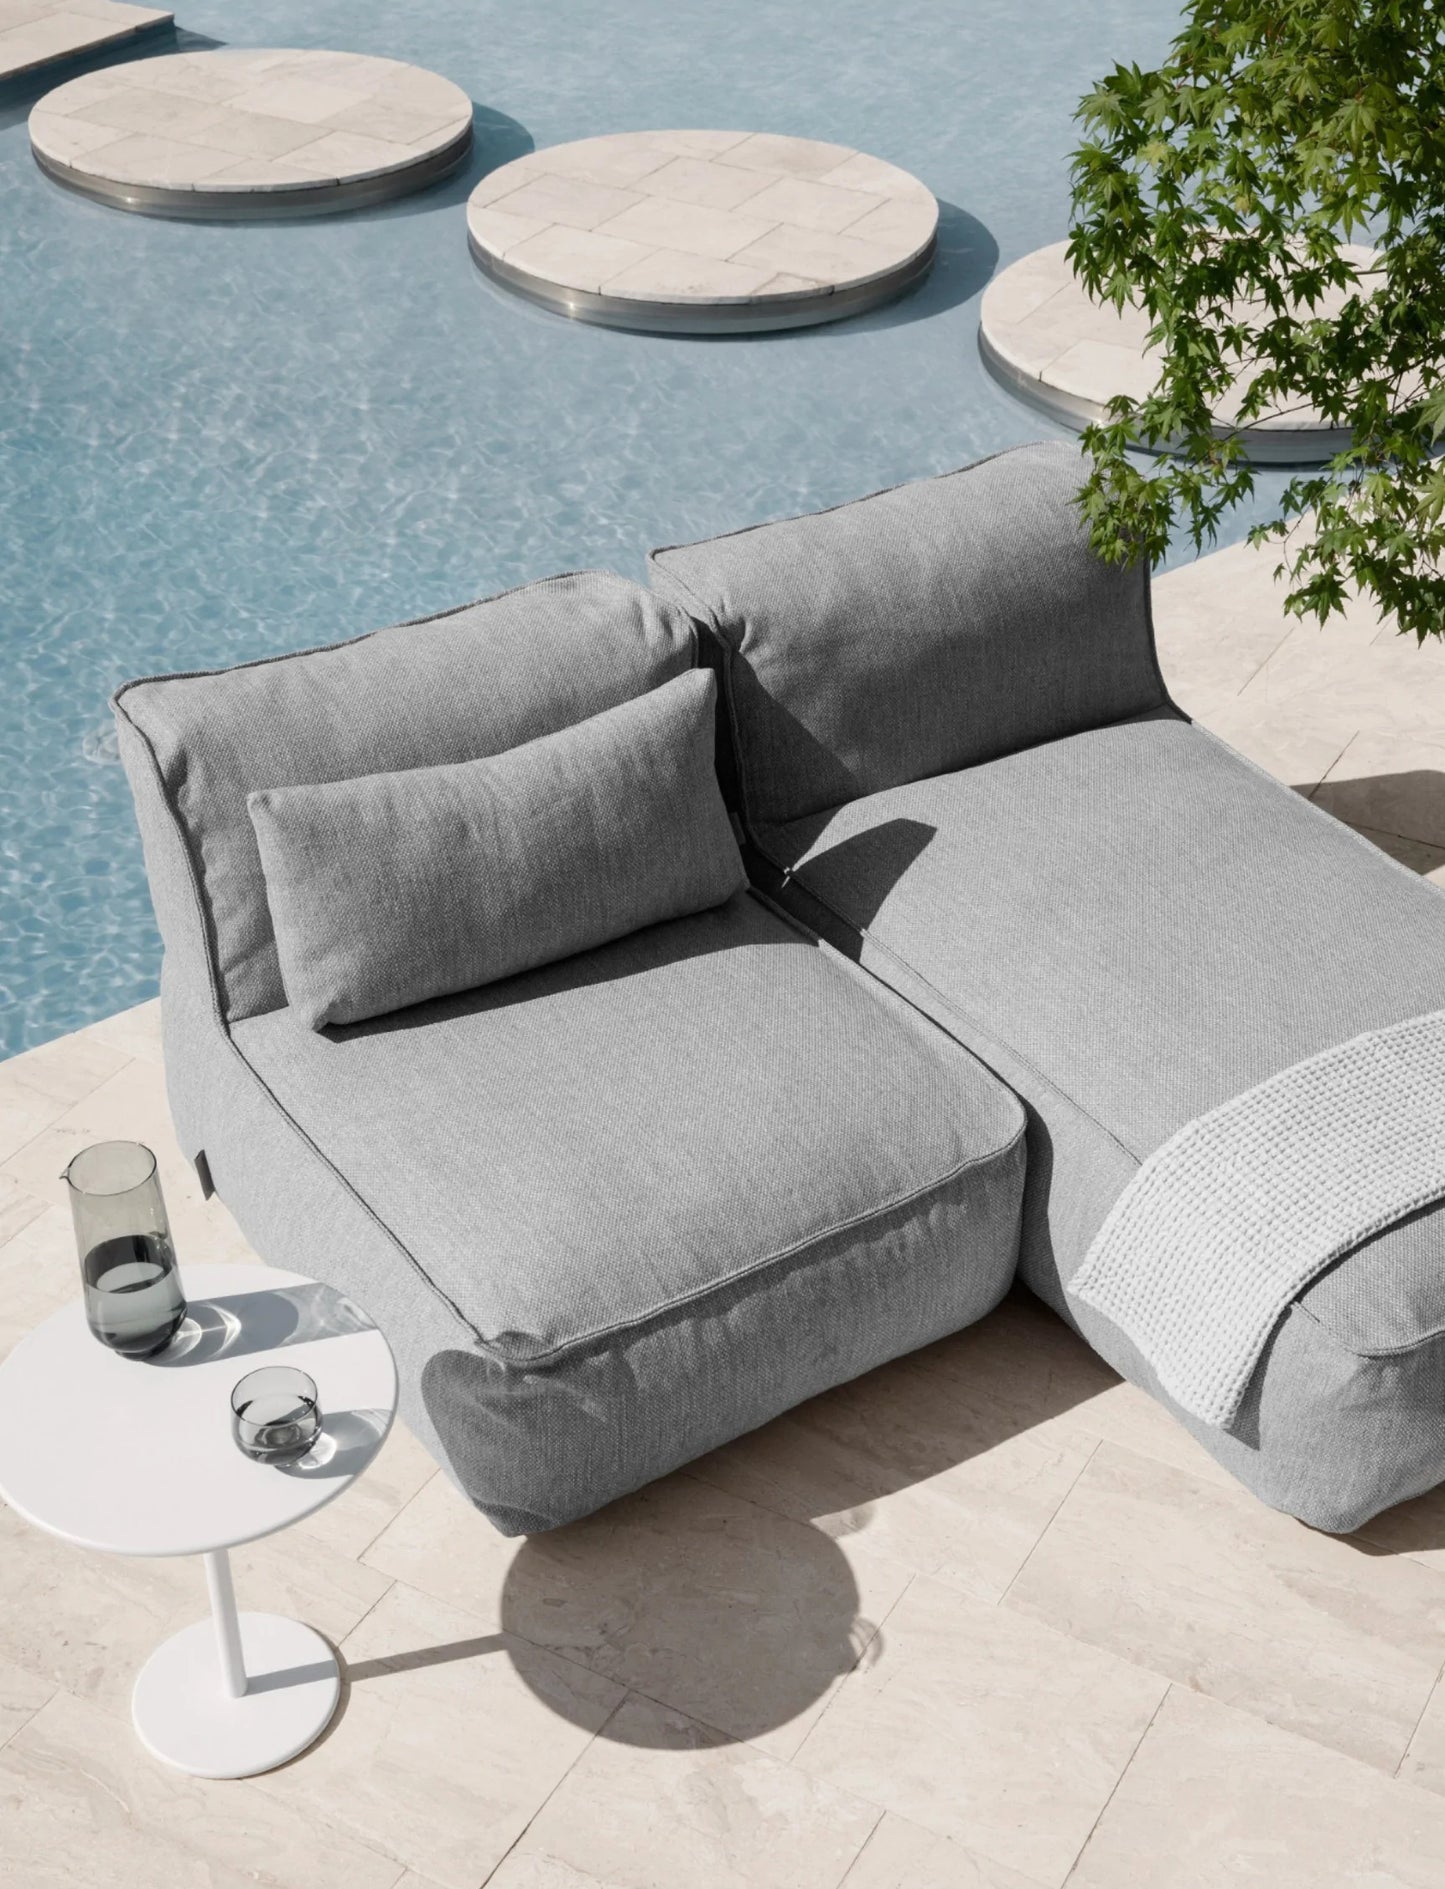 Blomus Grow Single Sectional Outdoor Patio Seat Cloud 62061